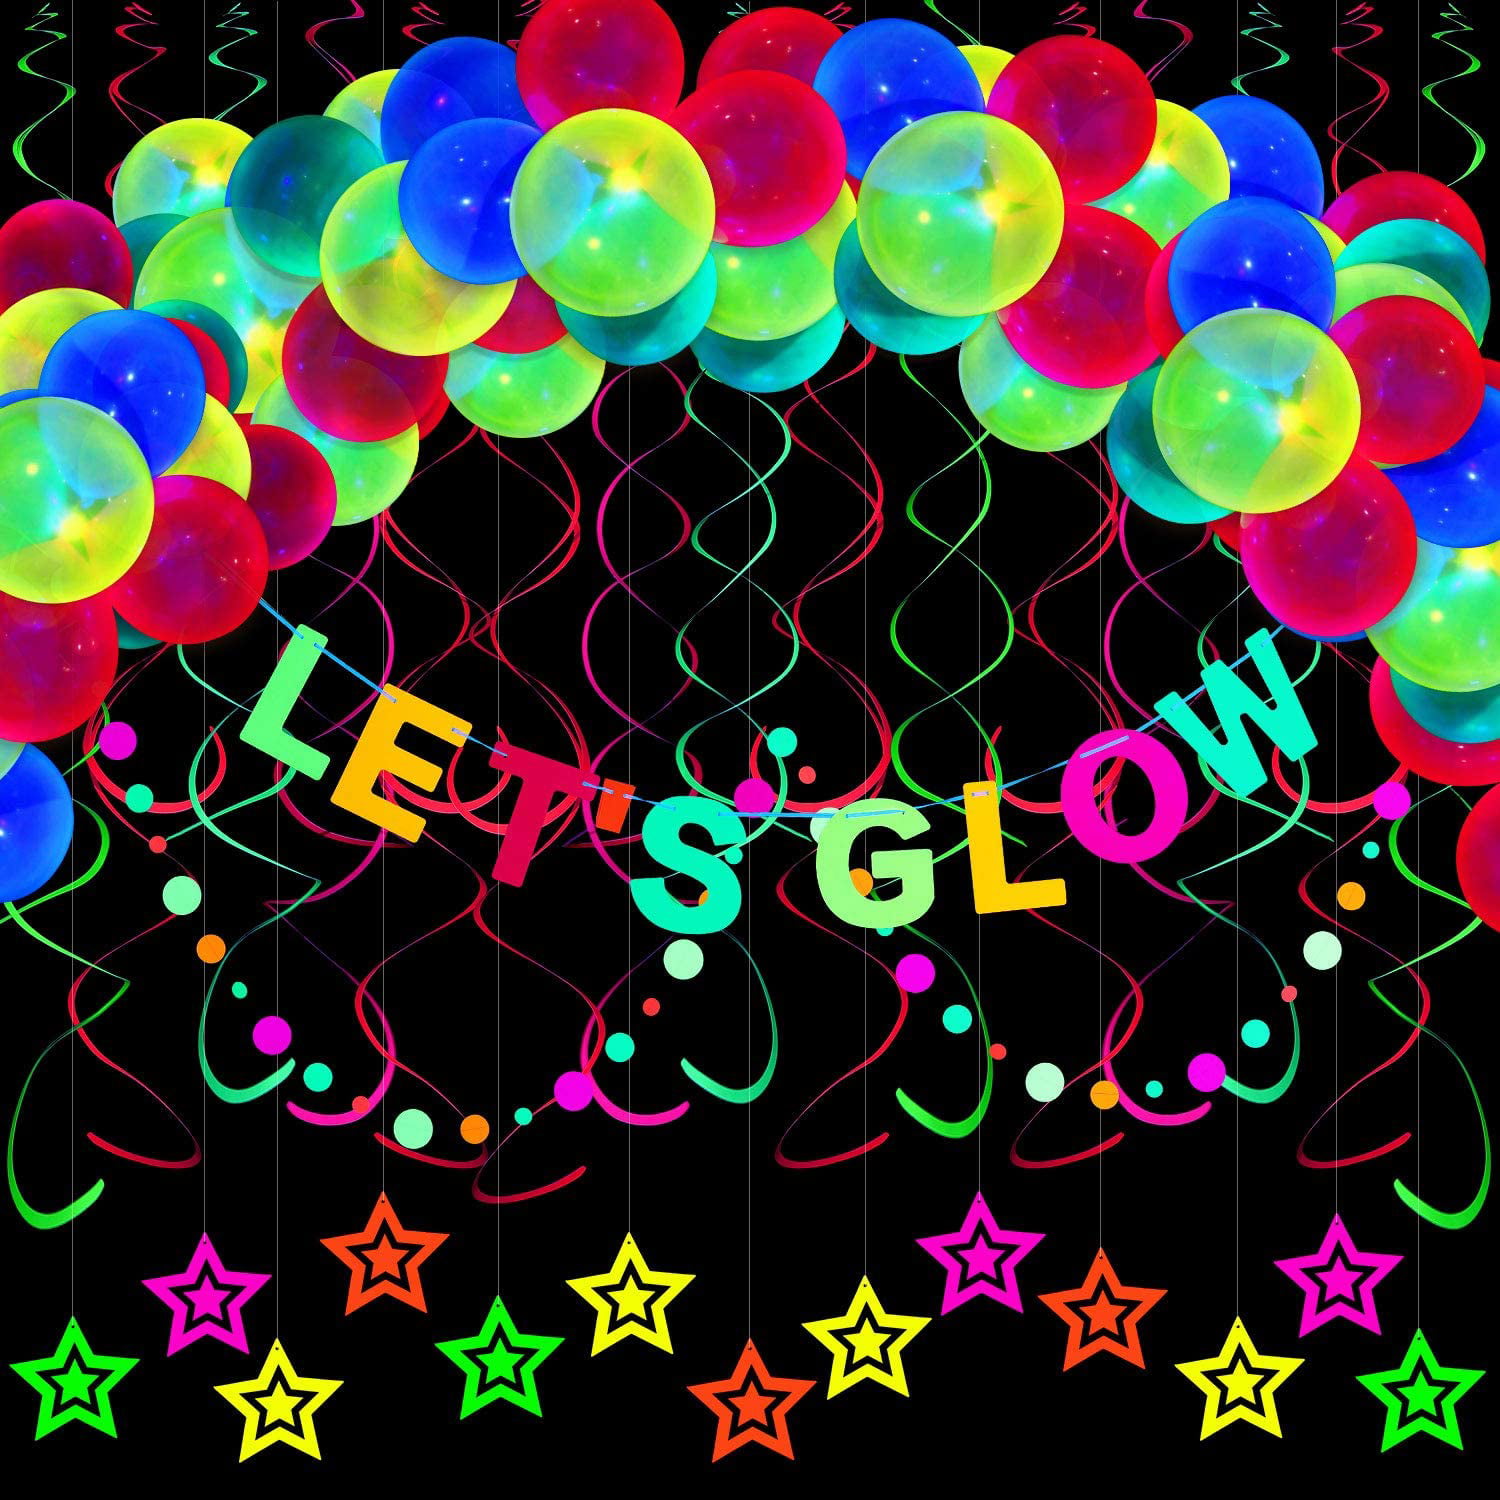 Circle Dots Stars Garlands and Hanging Decorations 53 Pieces Glow Neon Birthday Party Supplies Glow in the Dark Happy Birthday Banner with UV Black Light Reactive Cake Topper Set 01 Hats Neon Balloons